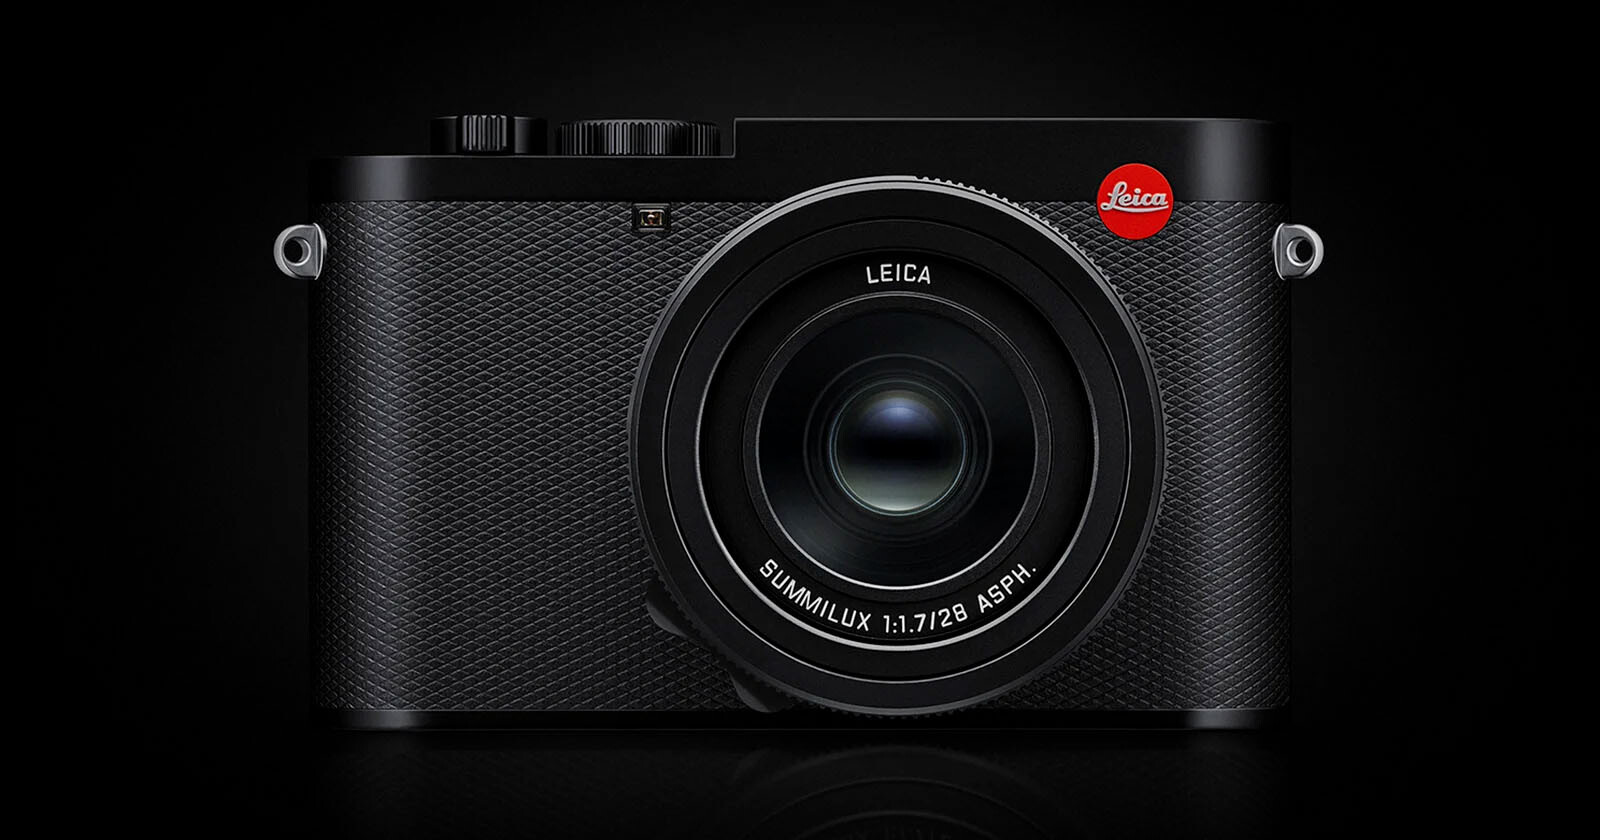  leica series always used leaf shutter but went 